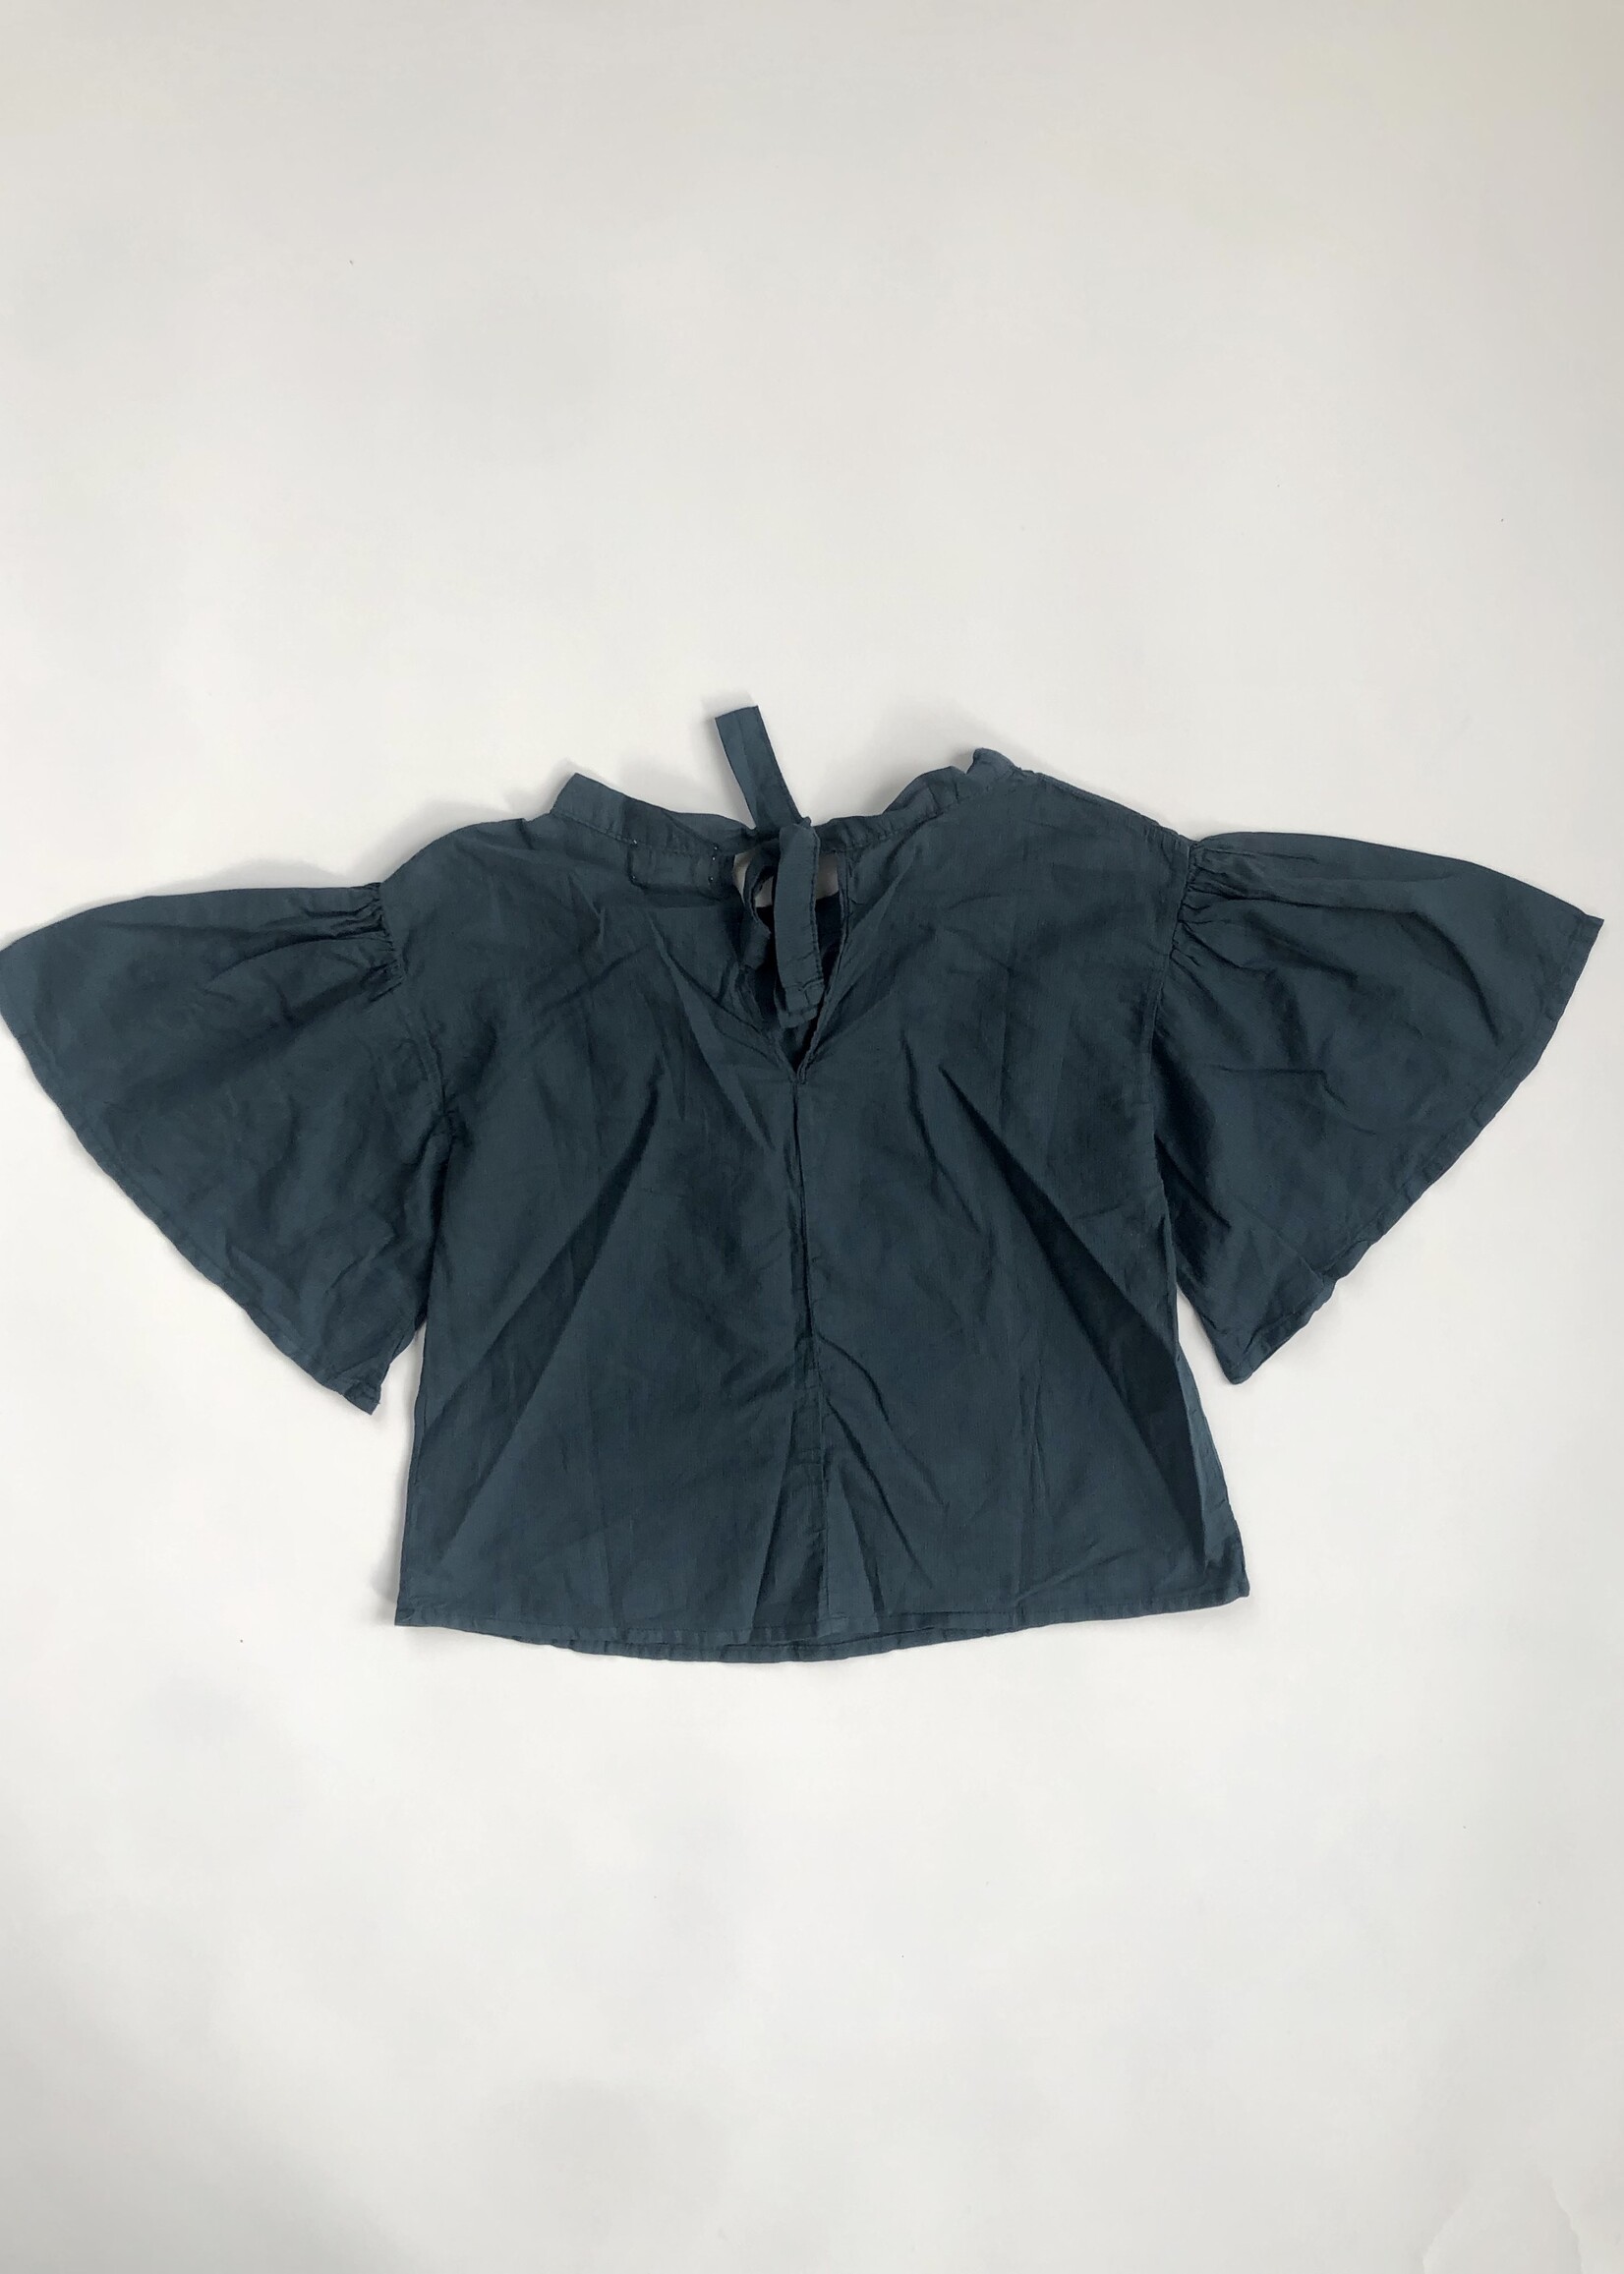 Long Live The Queen Blue grey Ruffle blouse 4-6y